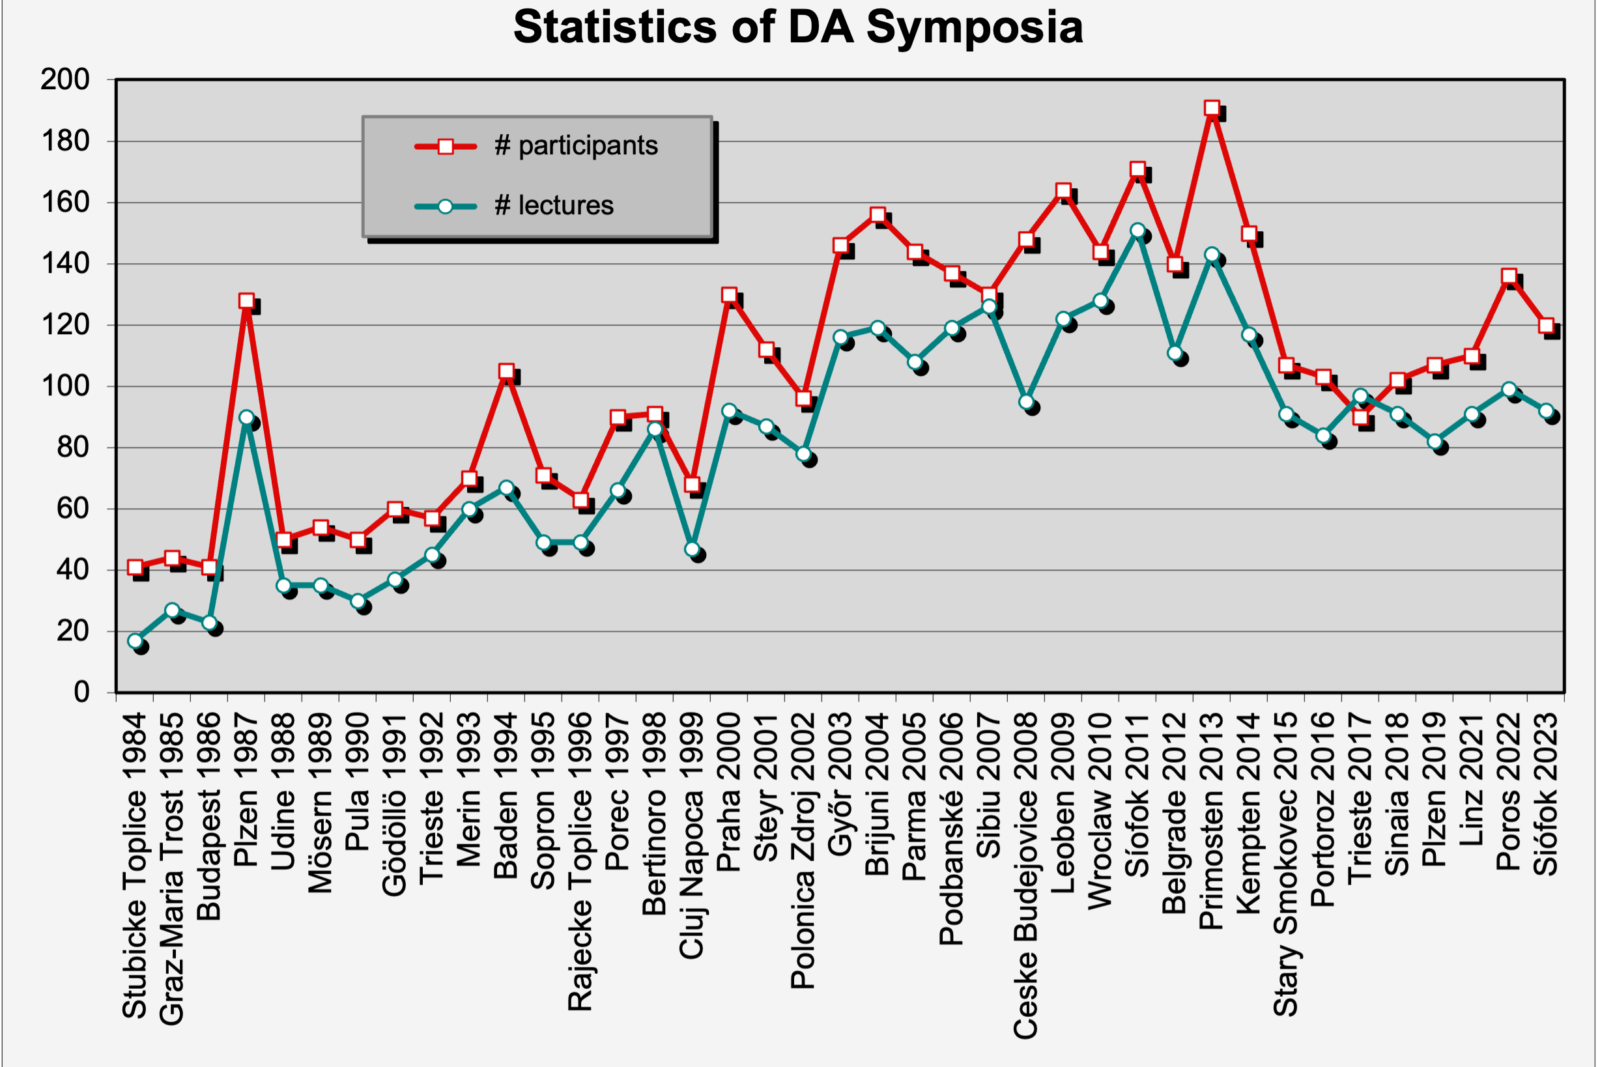 Statistics of DA Symposia: number of participants/lecturers at previous symposia from 1984 to 2023